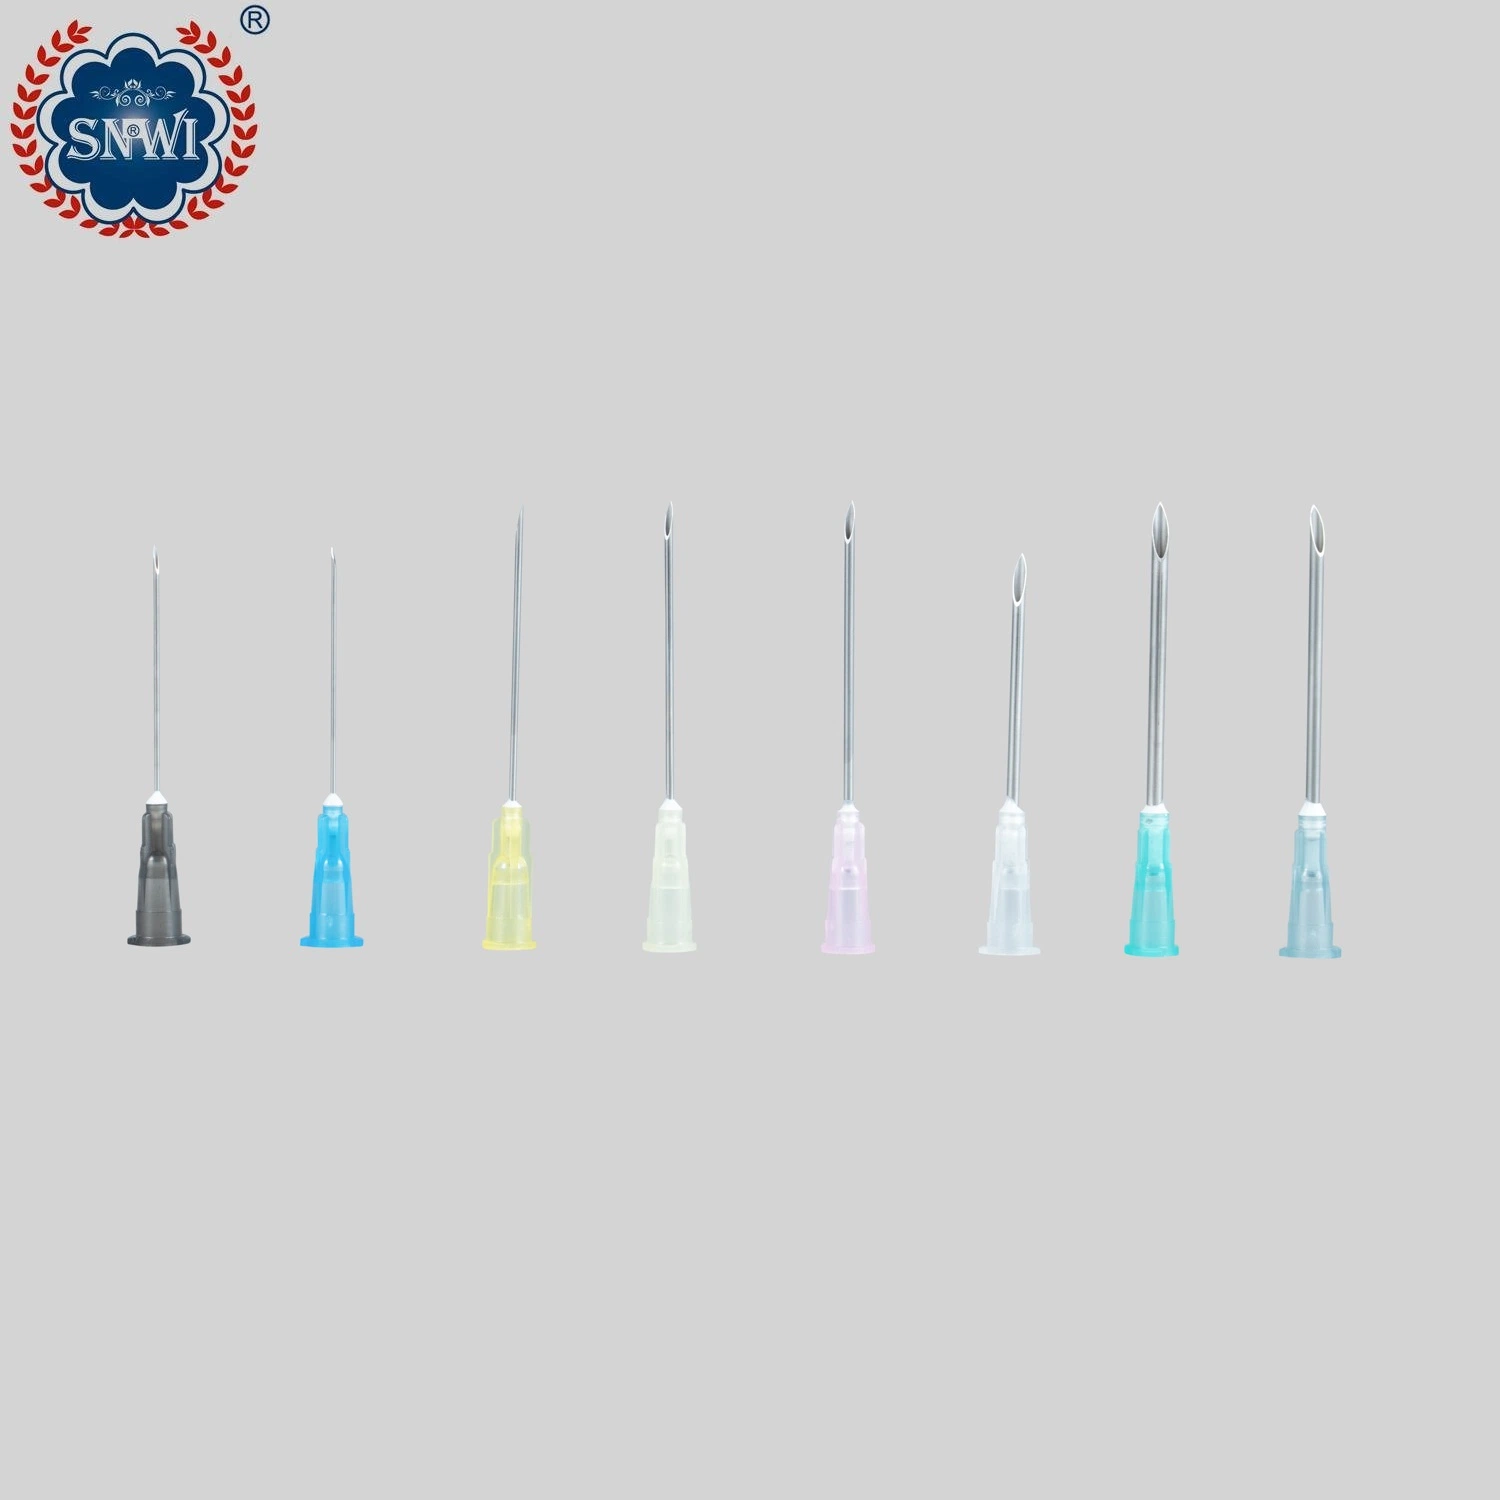 High Quality Disposable Medical Syringe Sterile Luer Lock/Slip Hypodermic Injection Needle